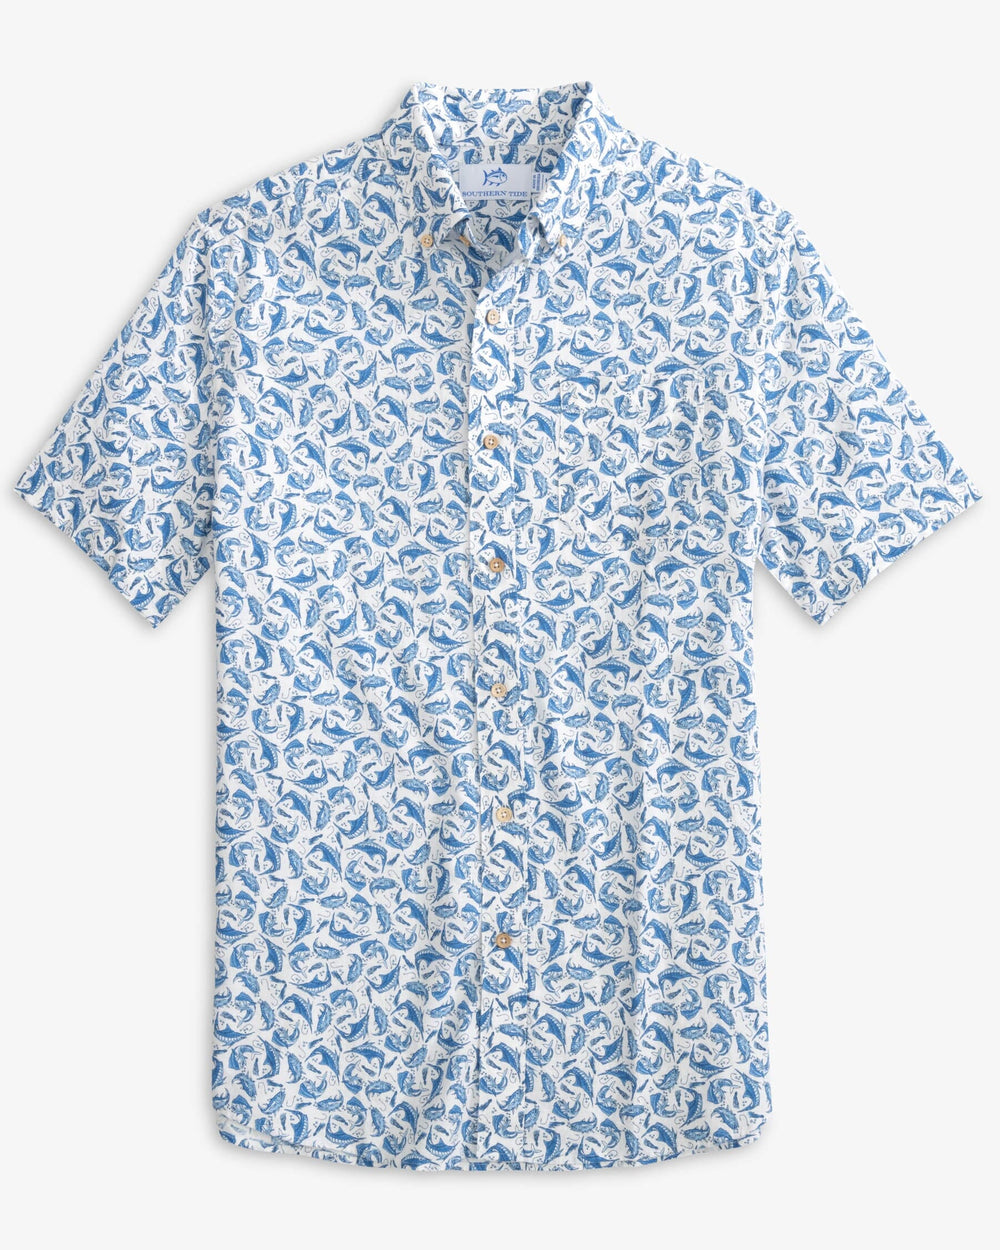 The front view of the Southern Tide Catch You Later Short Sleeve Long Sleeve Button Down Sport Shirt by Southern Tide - Clearwater Blue